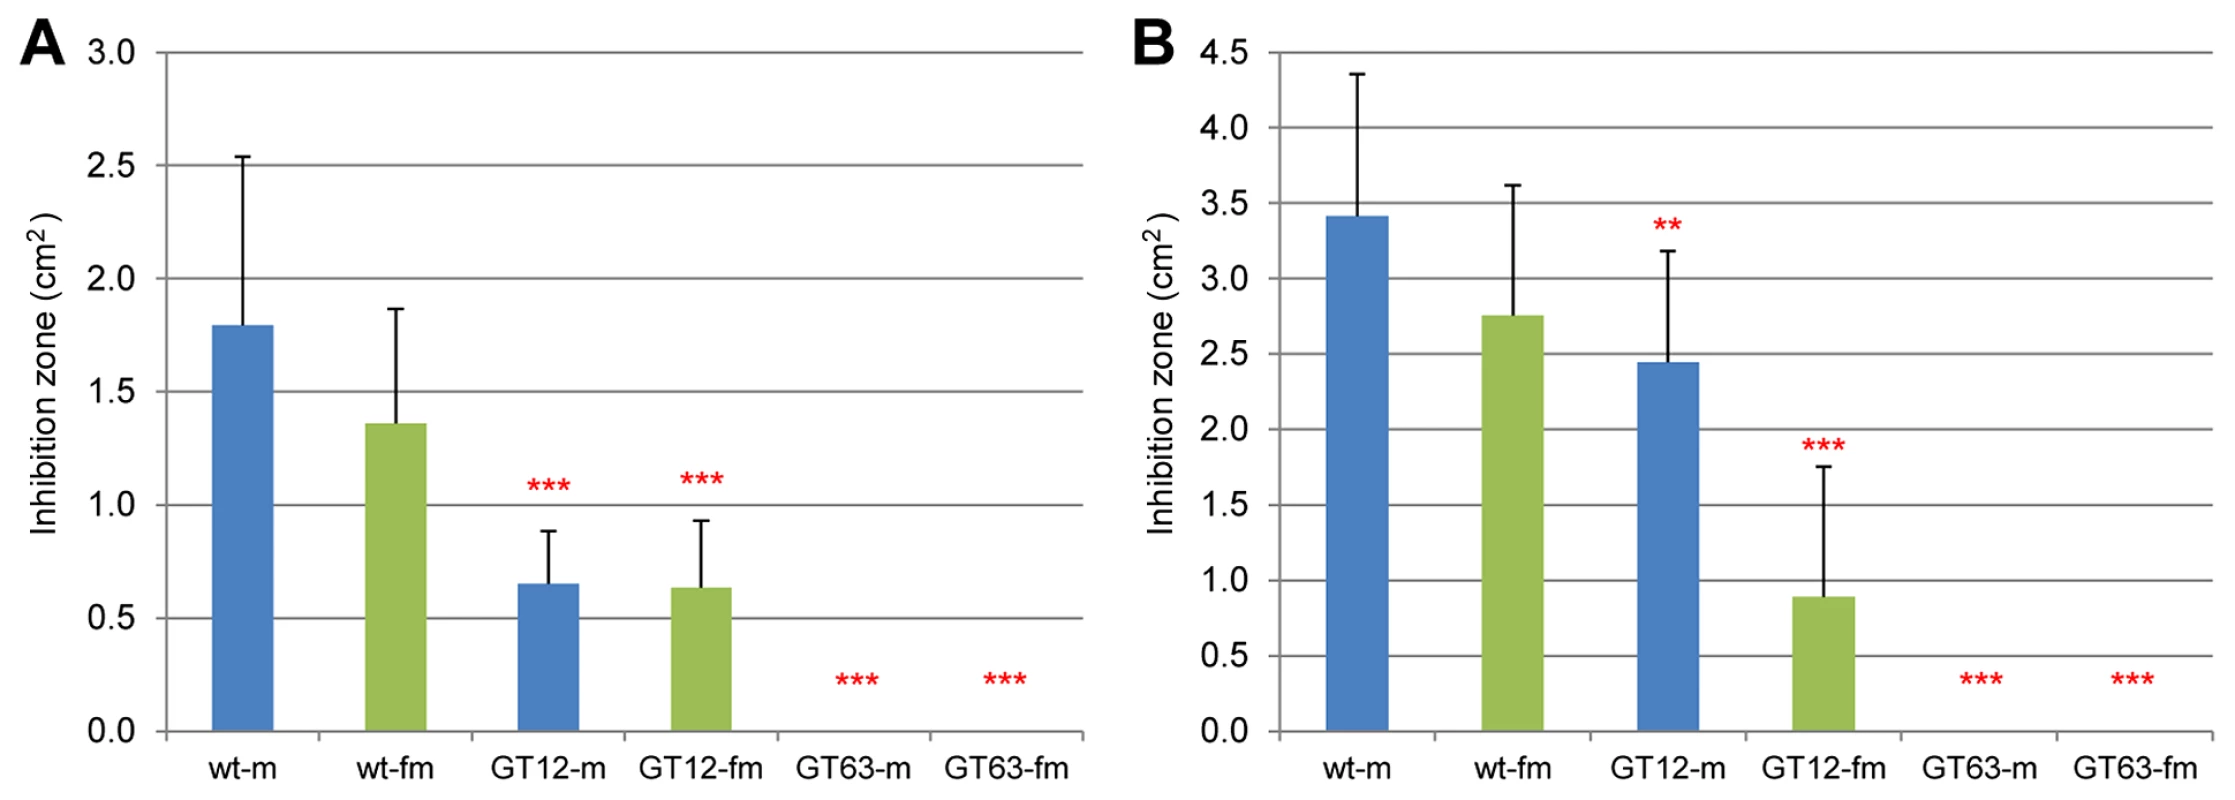 Microbe growth inhibition assays of wild-type and RNAi-knock-down glands.